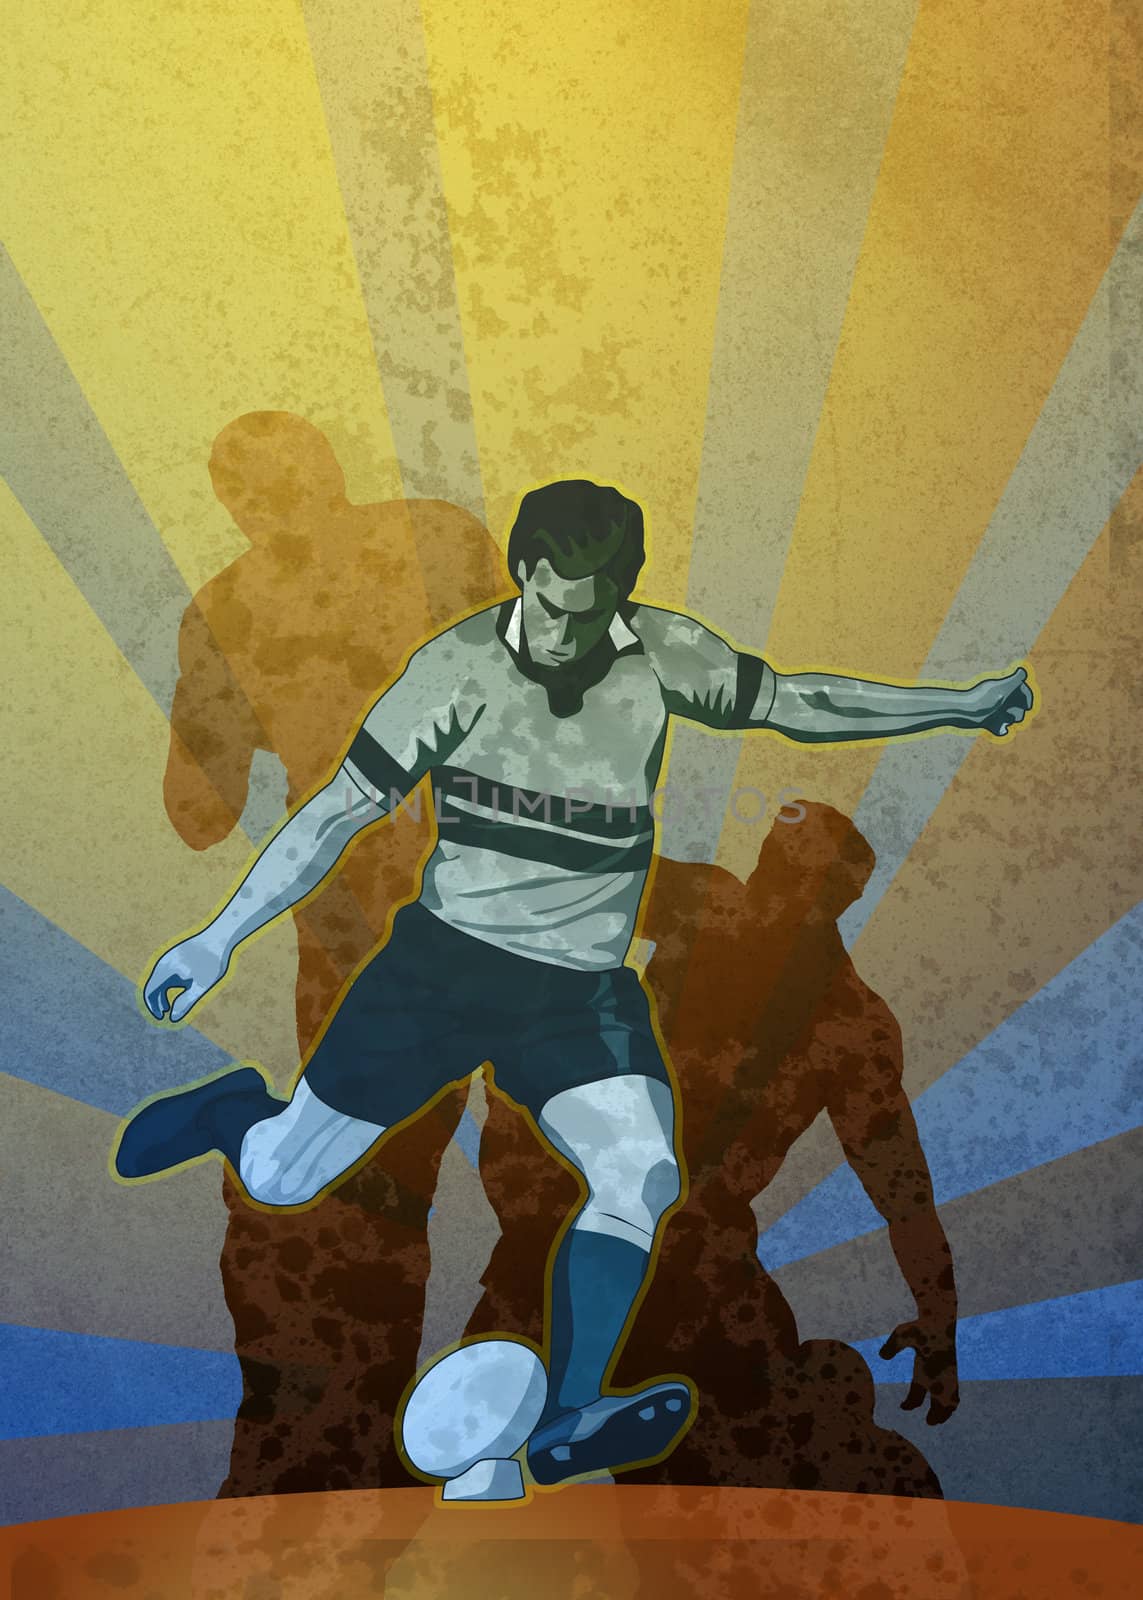 poster illustration of a rugby player kicking the ball with sunburst in background with grunge texture